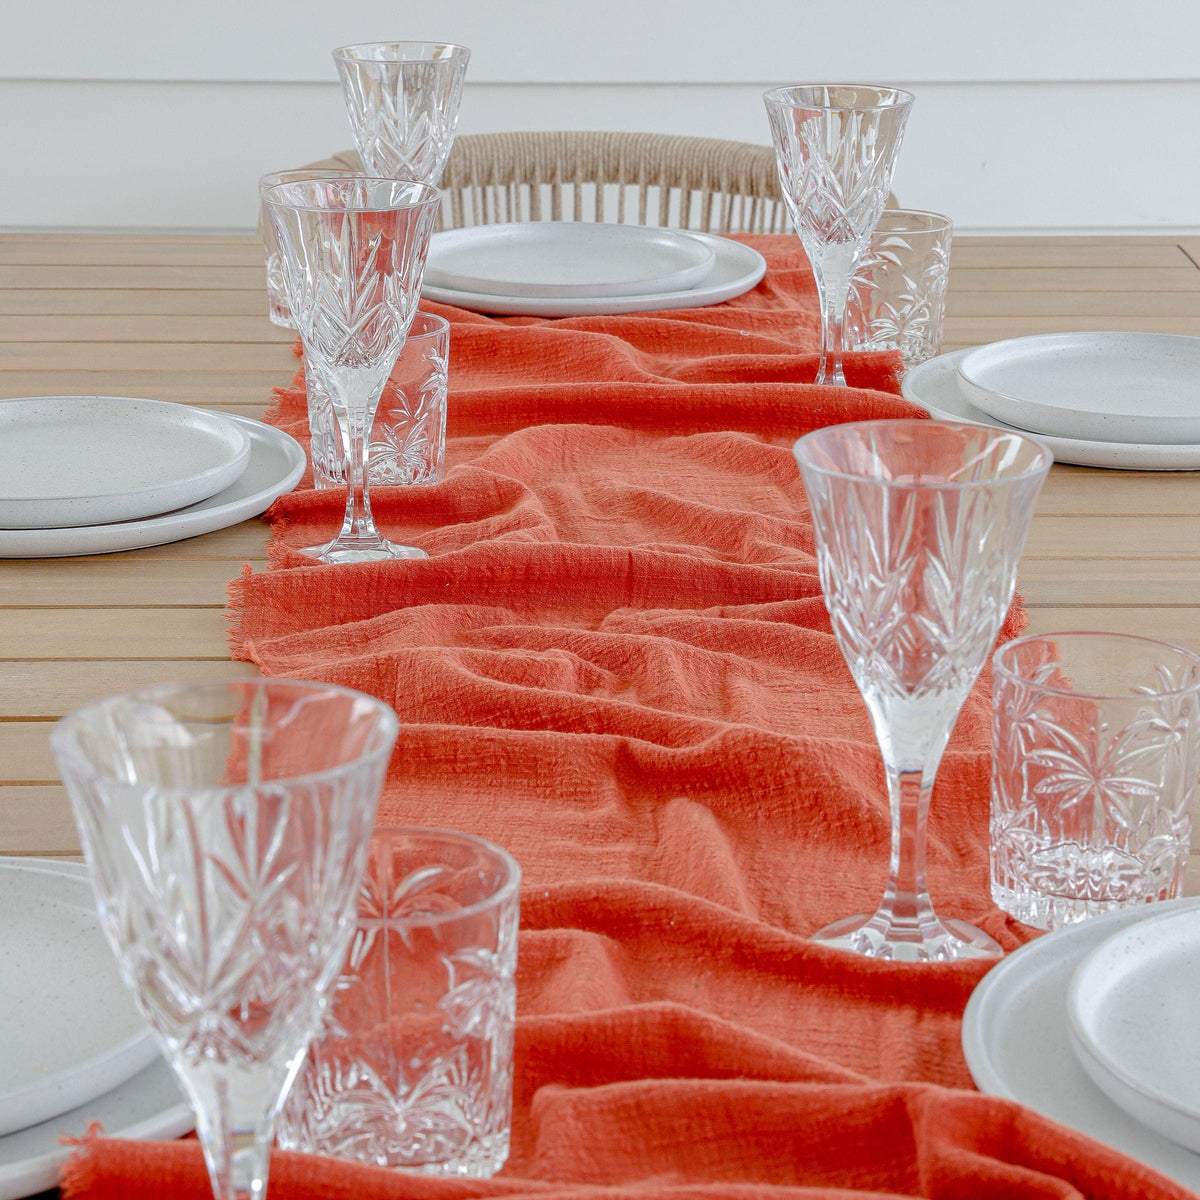 Hire Rustic Cotton Table Runners - 3m